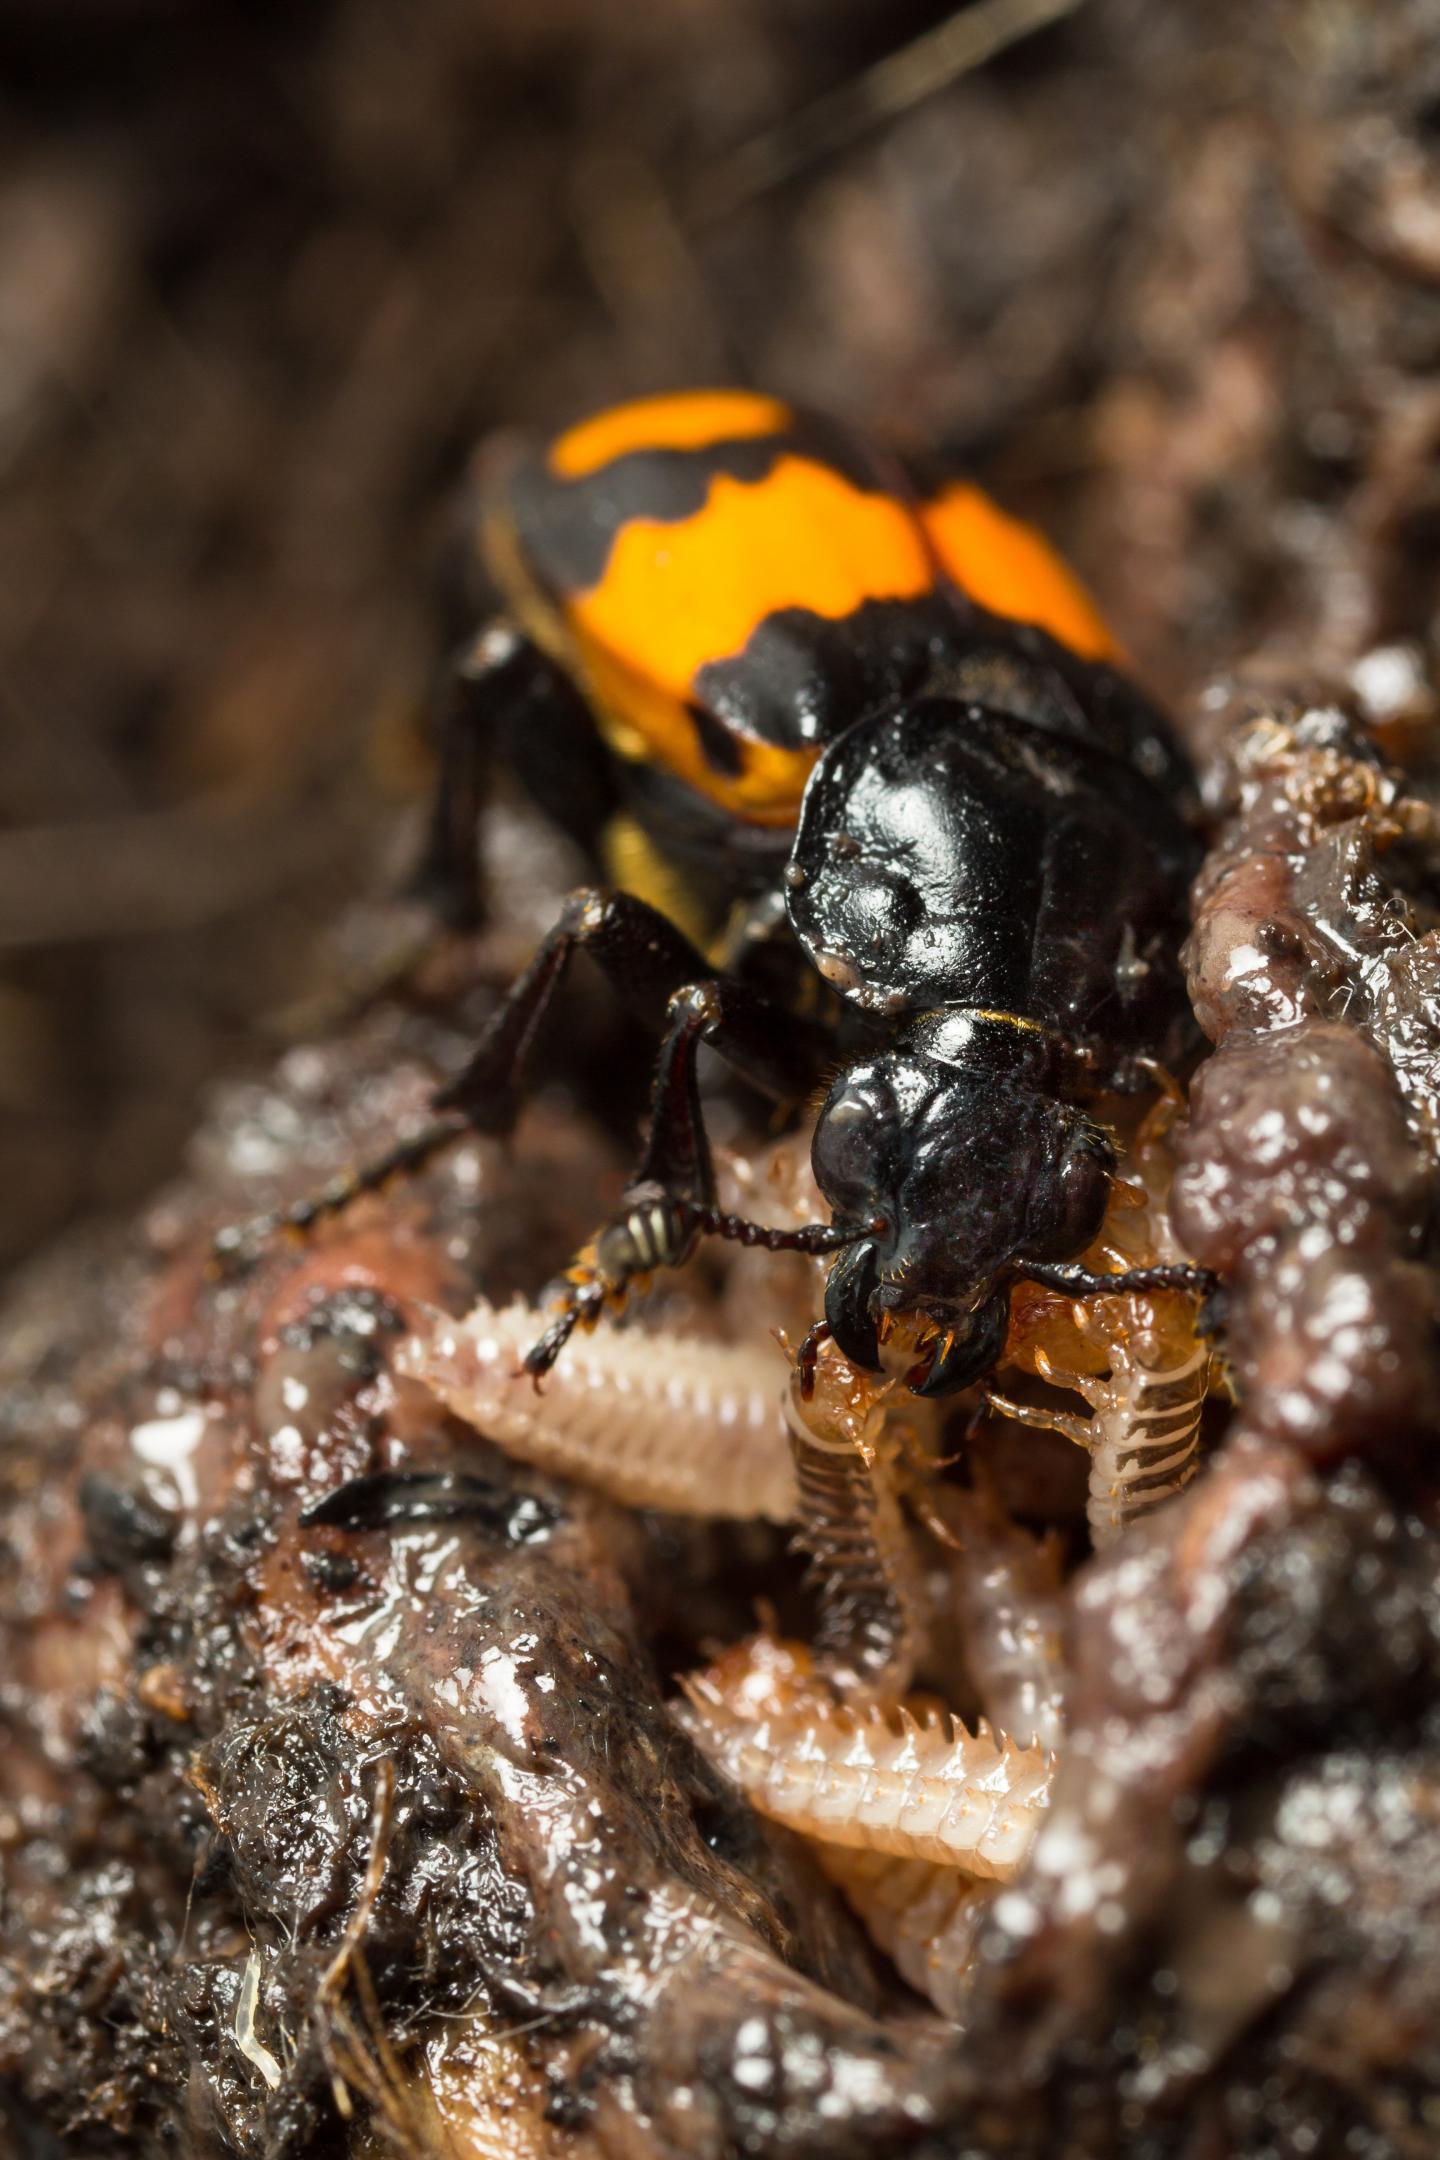 Larvae of the burying beetle Nicrophorus vespilloides developing in the absence of parental care.